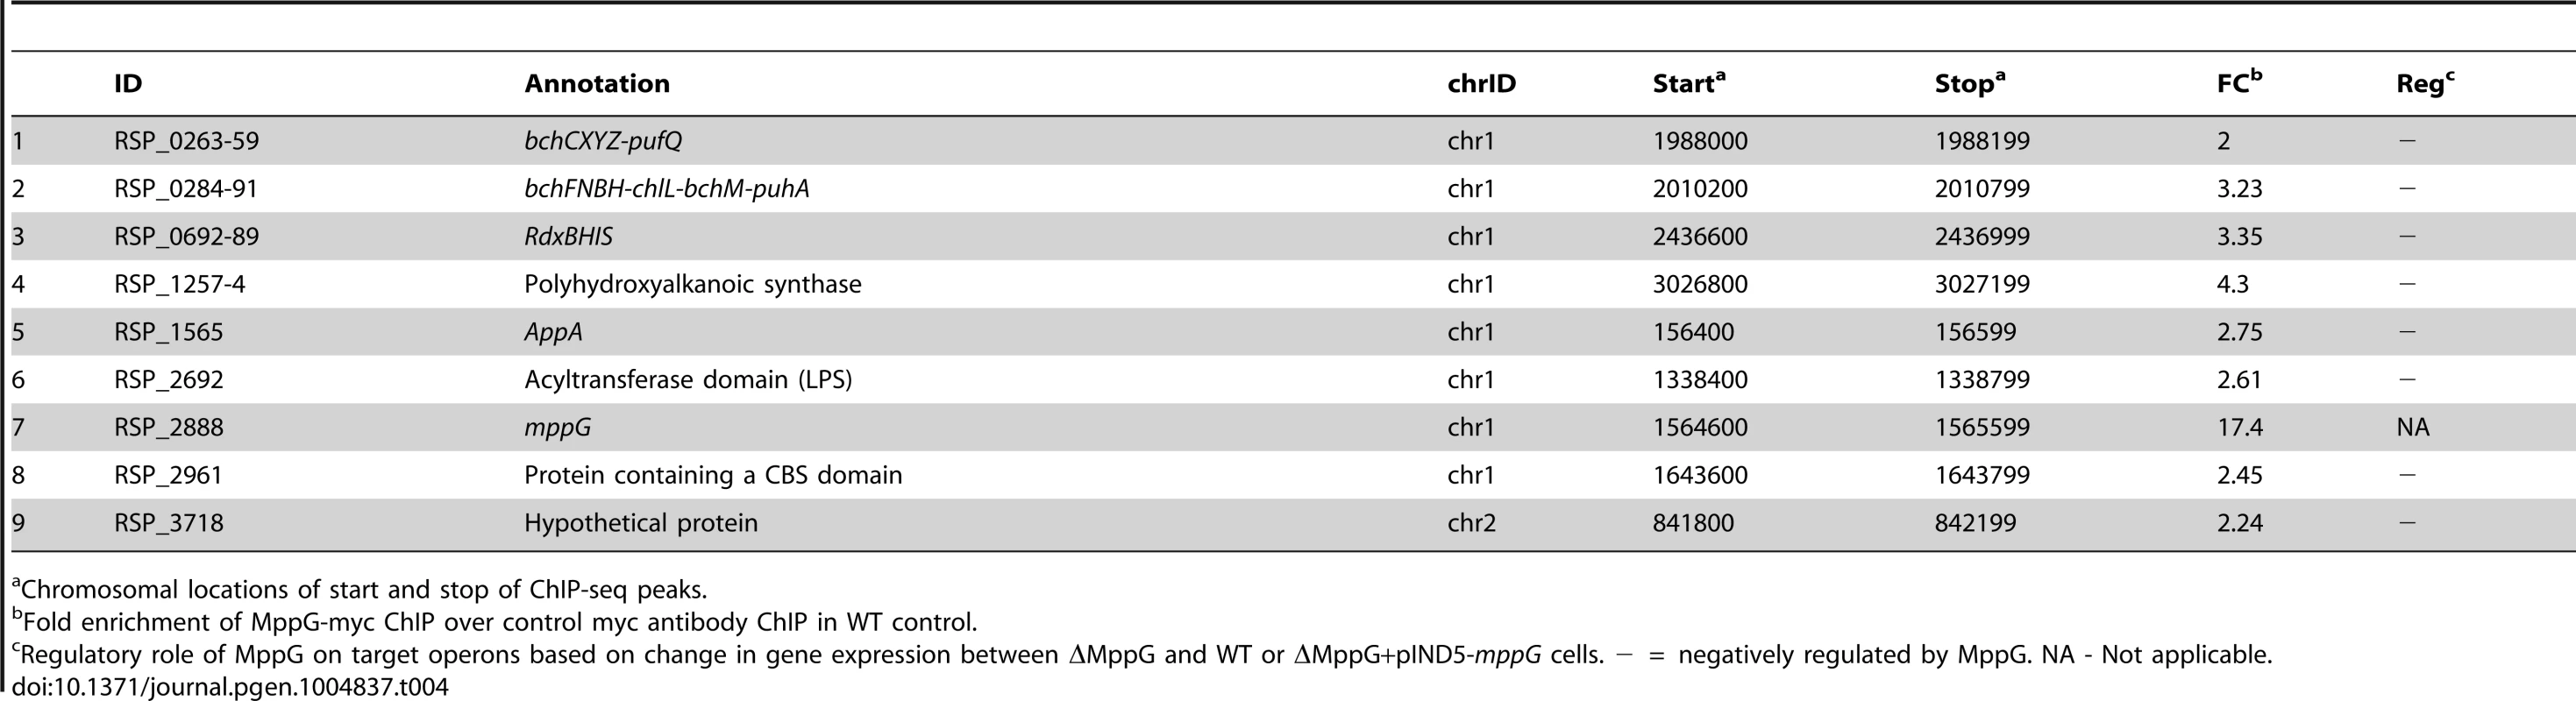 MppG target genes identified by ChIP-seq and gene expression analysis.